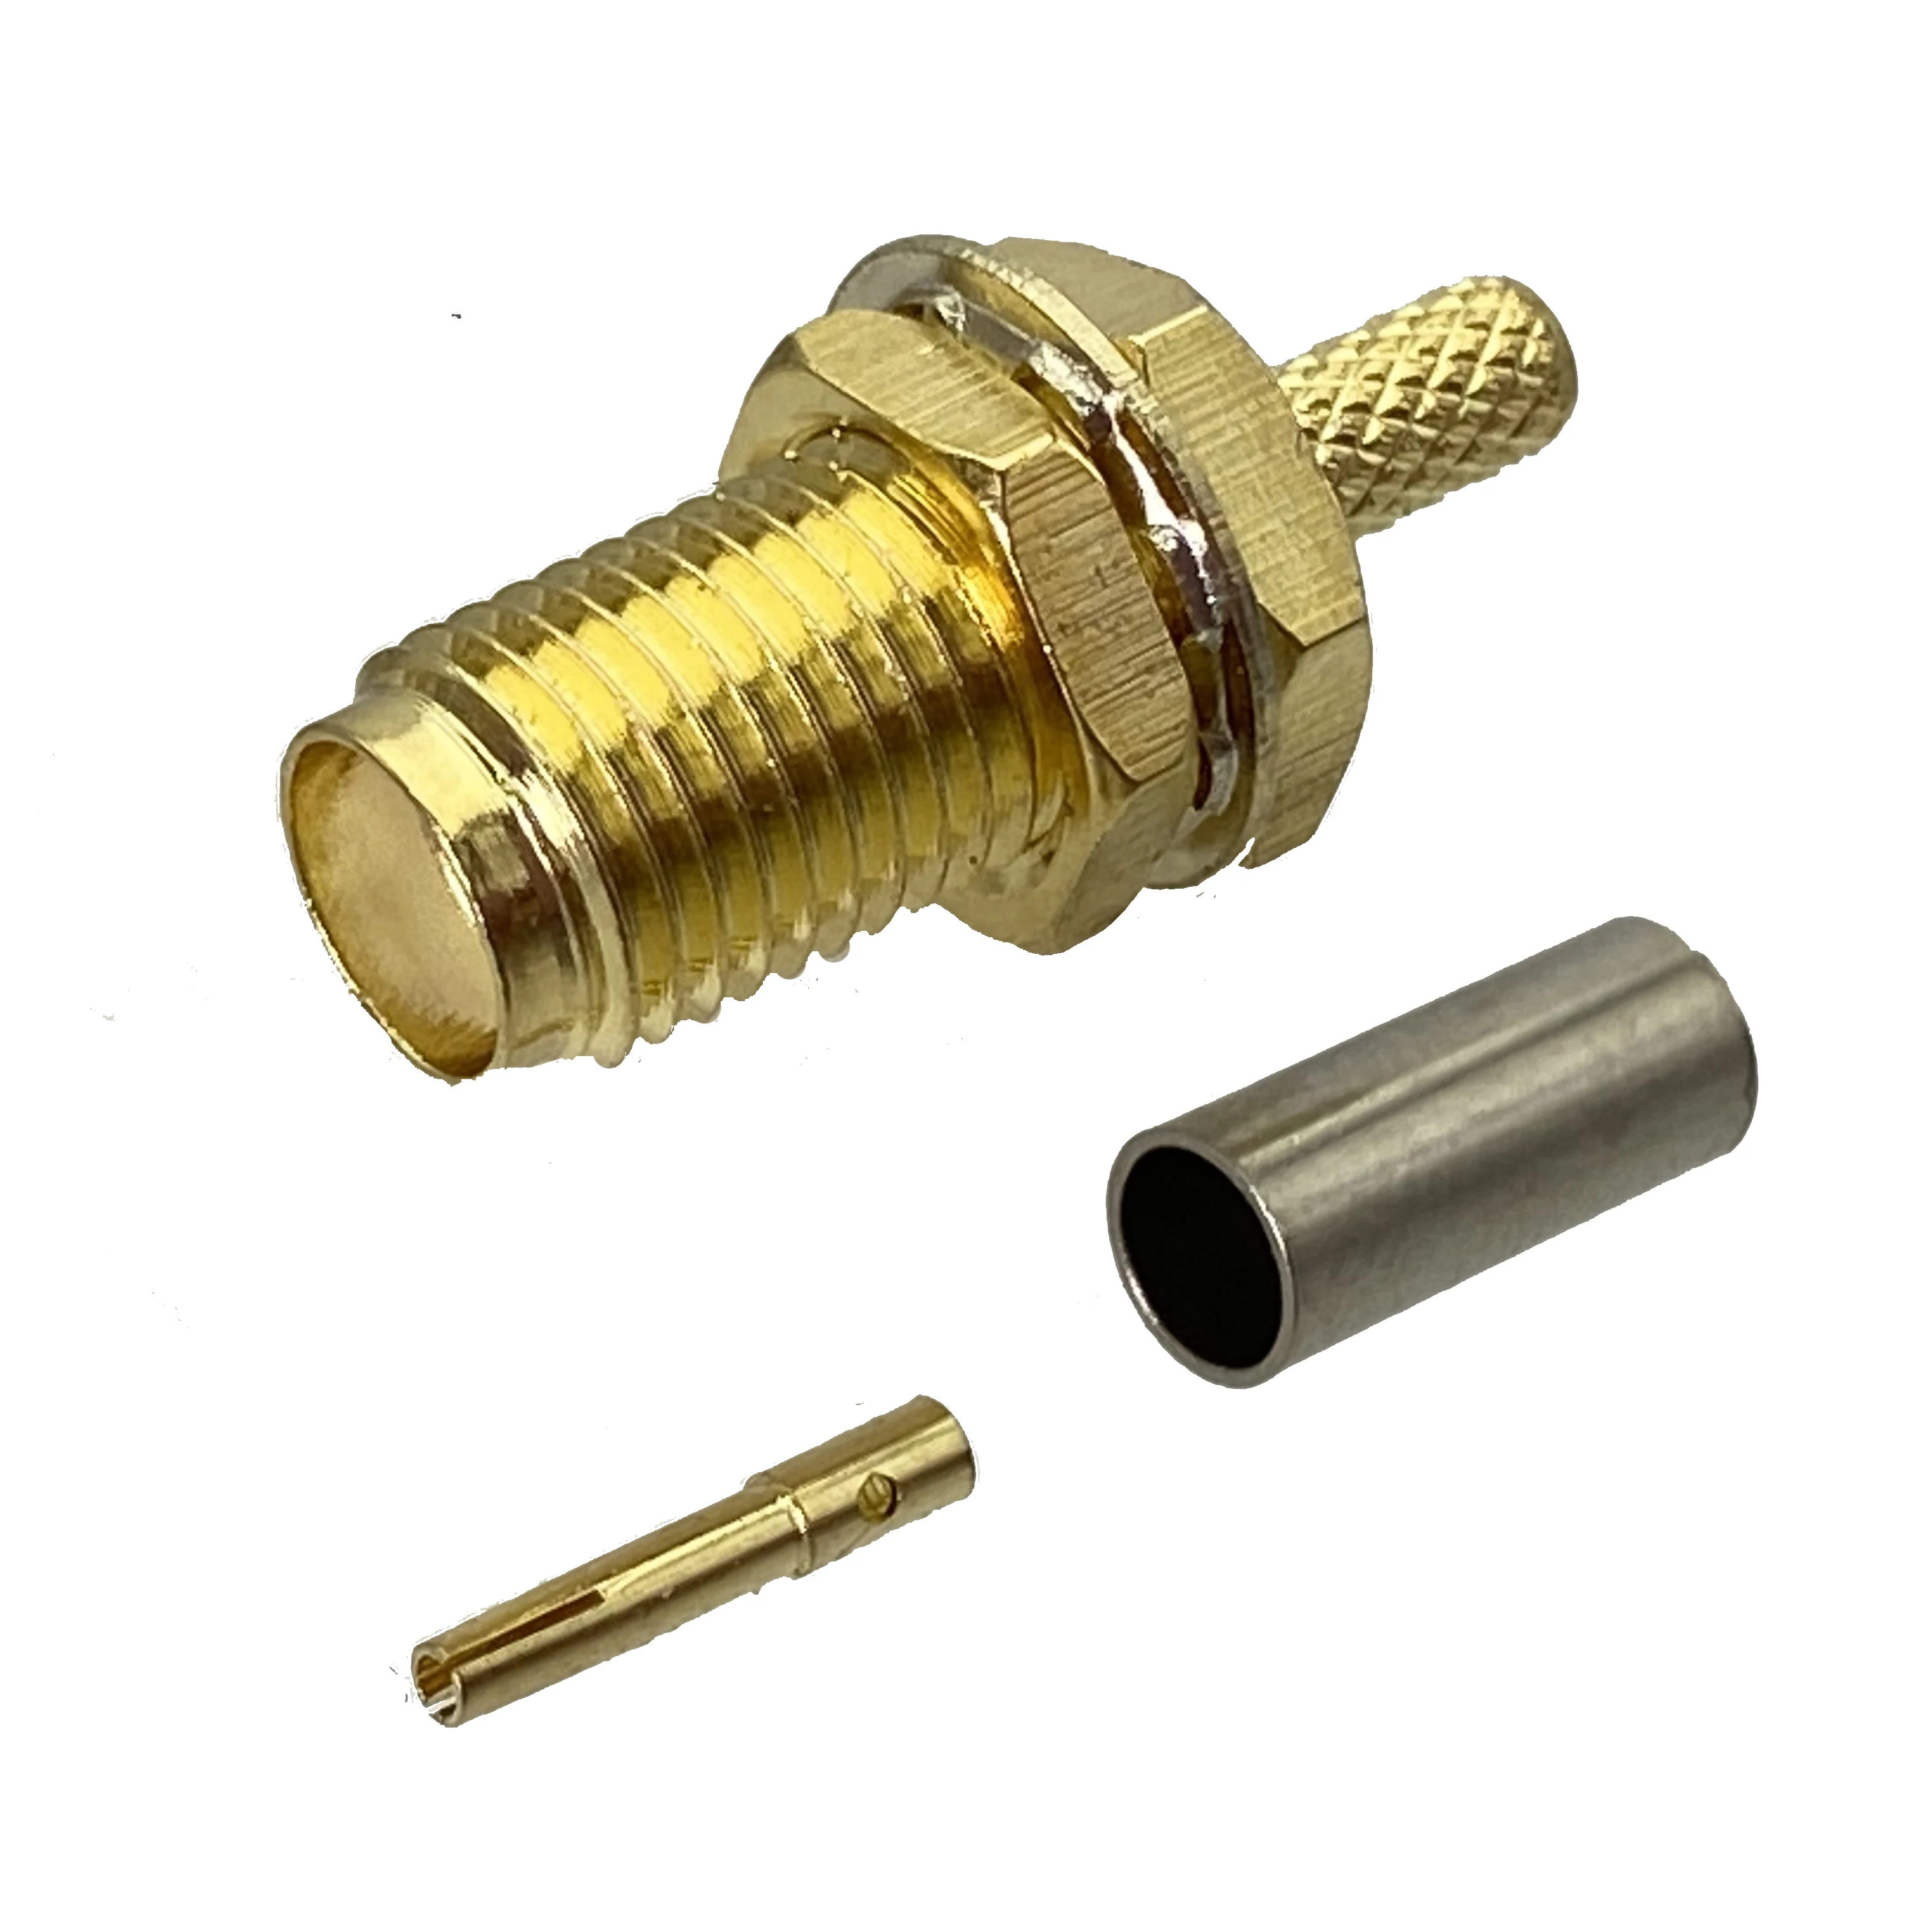 

1pcs Connector SMA Jack Female Bulkhead Nut Crimp For RG174 RG316 LMR100 Cable Straight RF Coaxial Adapter New